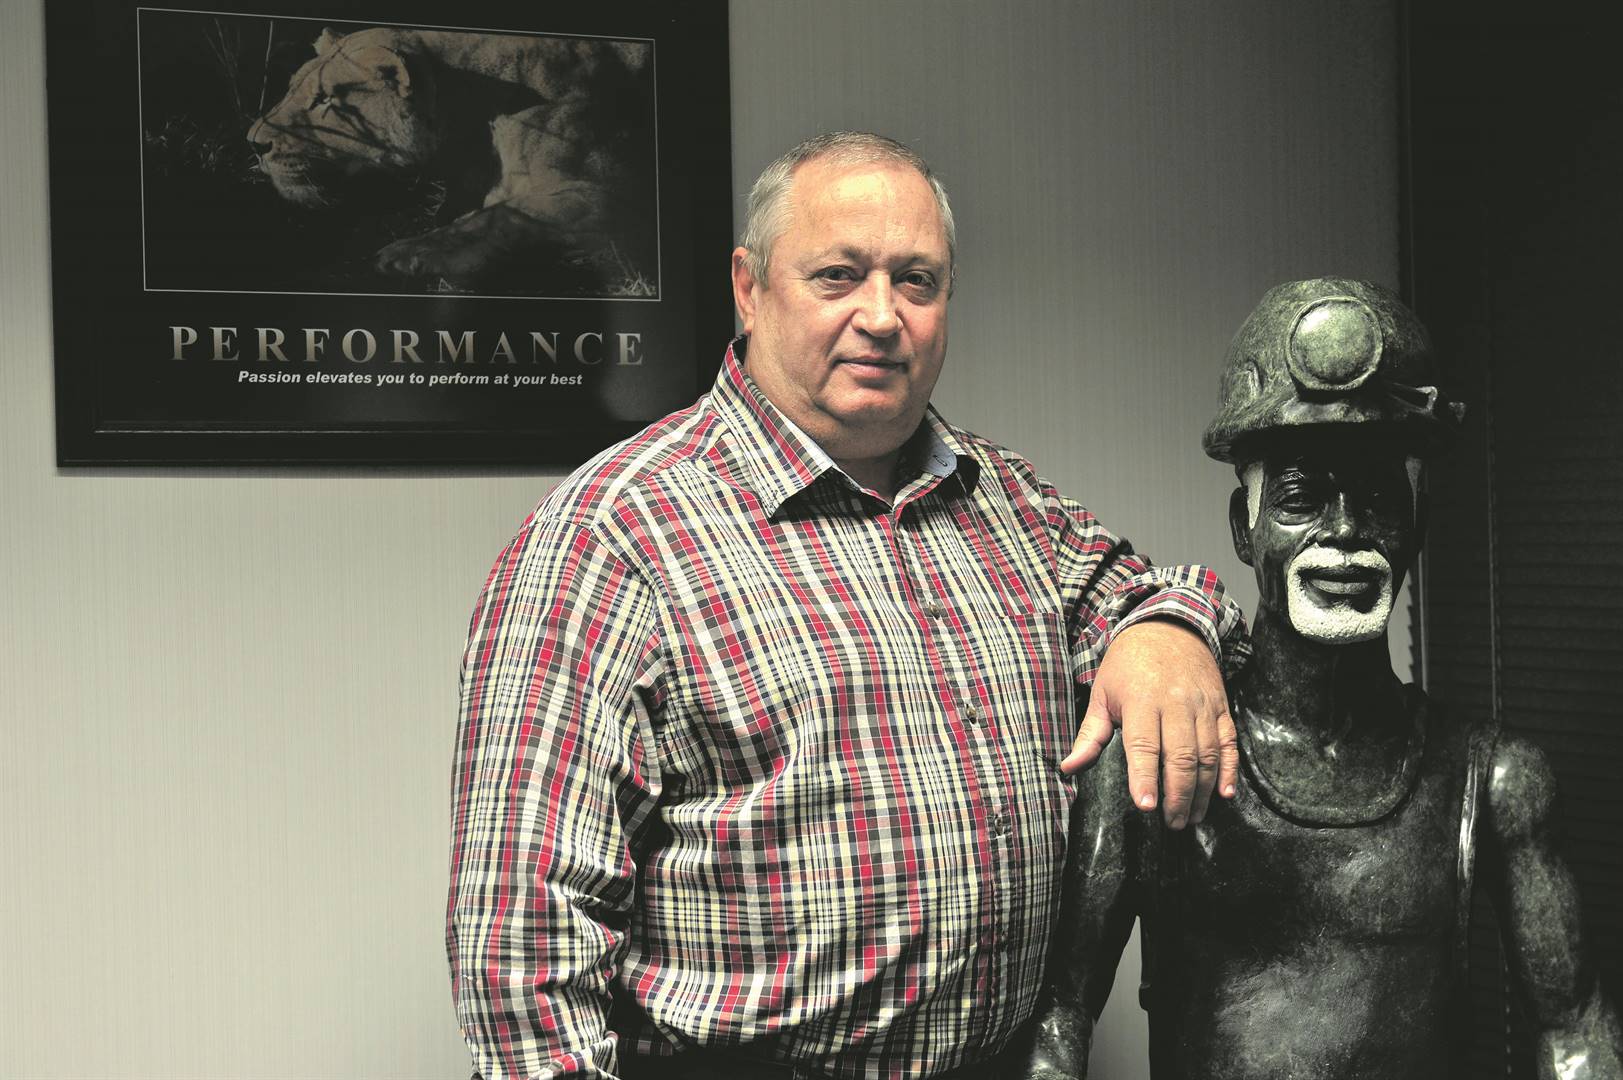 Sibanye-Stillwater CEO Neal Froneman was rewarded for achieving the target he had been given... but what about the related circumstances? Photo: Cebile Ntuli